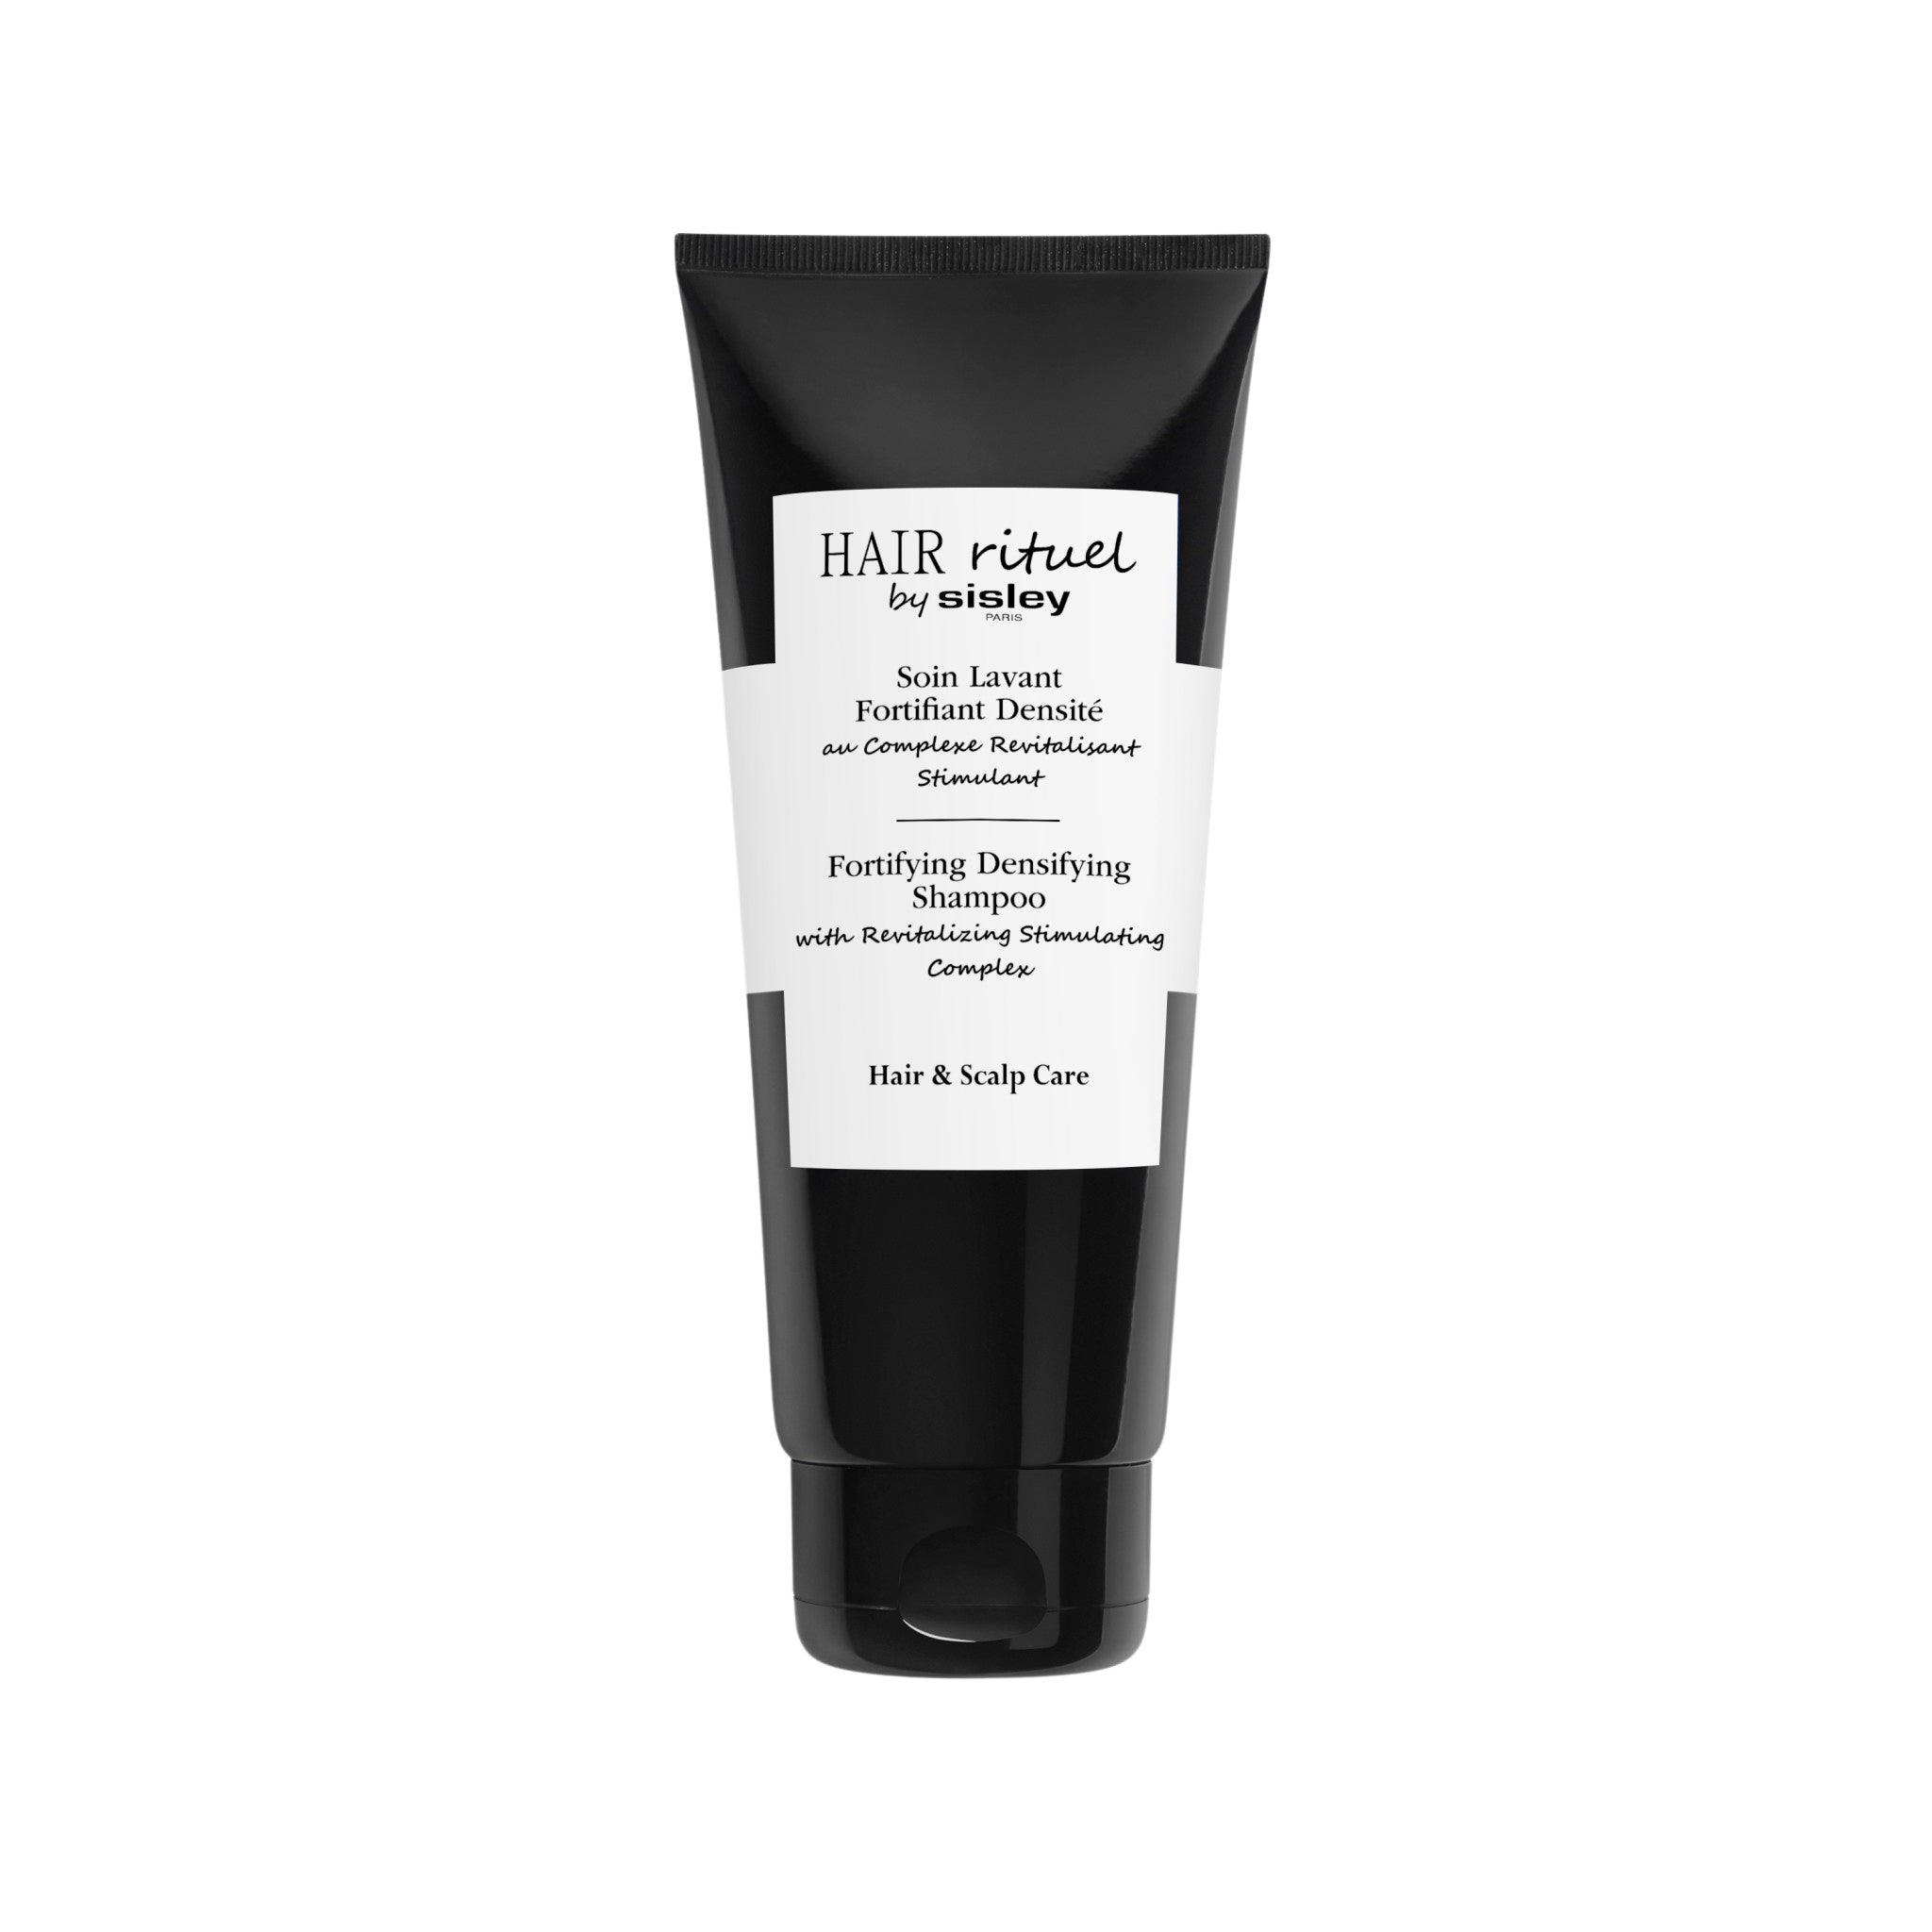 Sisley-Paris Hair Rituel Fortifying Densifying Shampoo Size variant: 6.7 oz main image. This product is for black hair